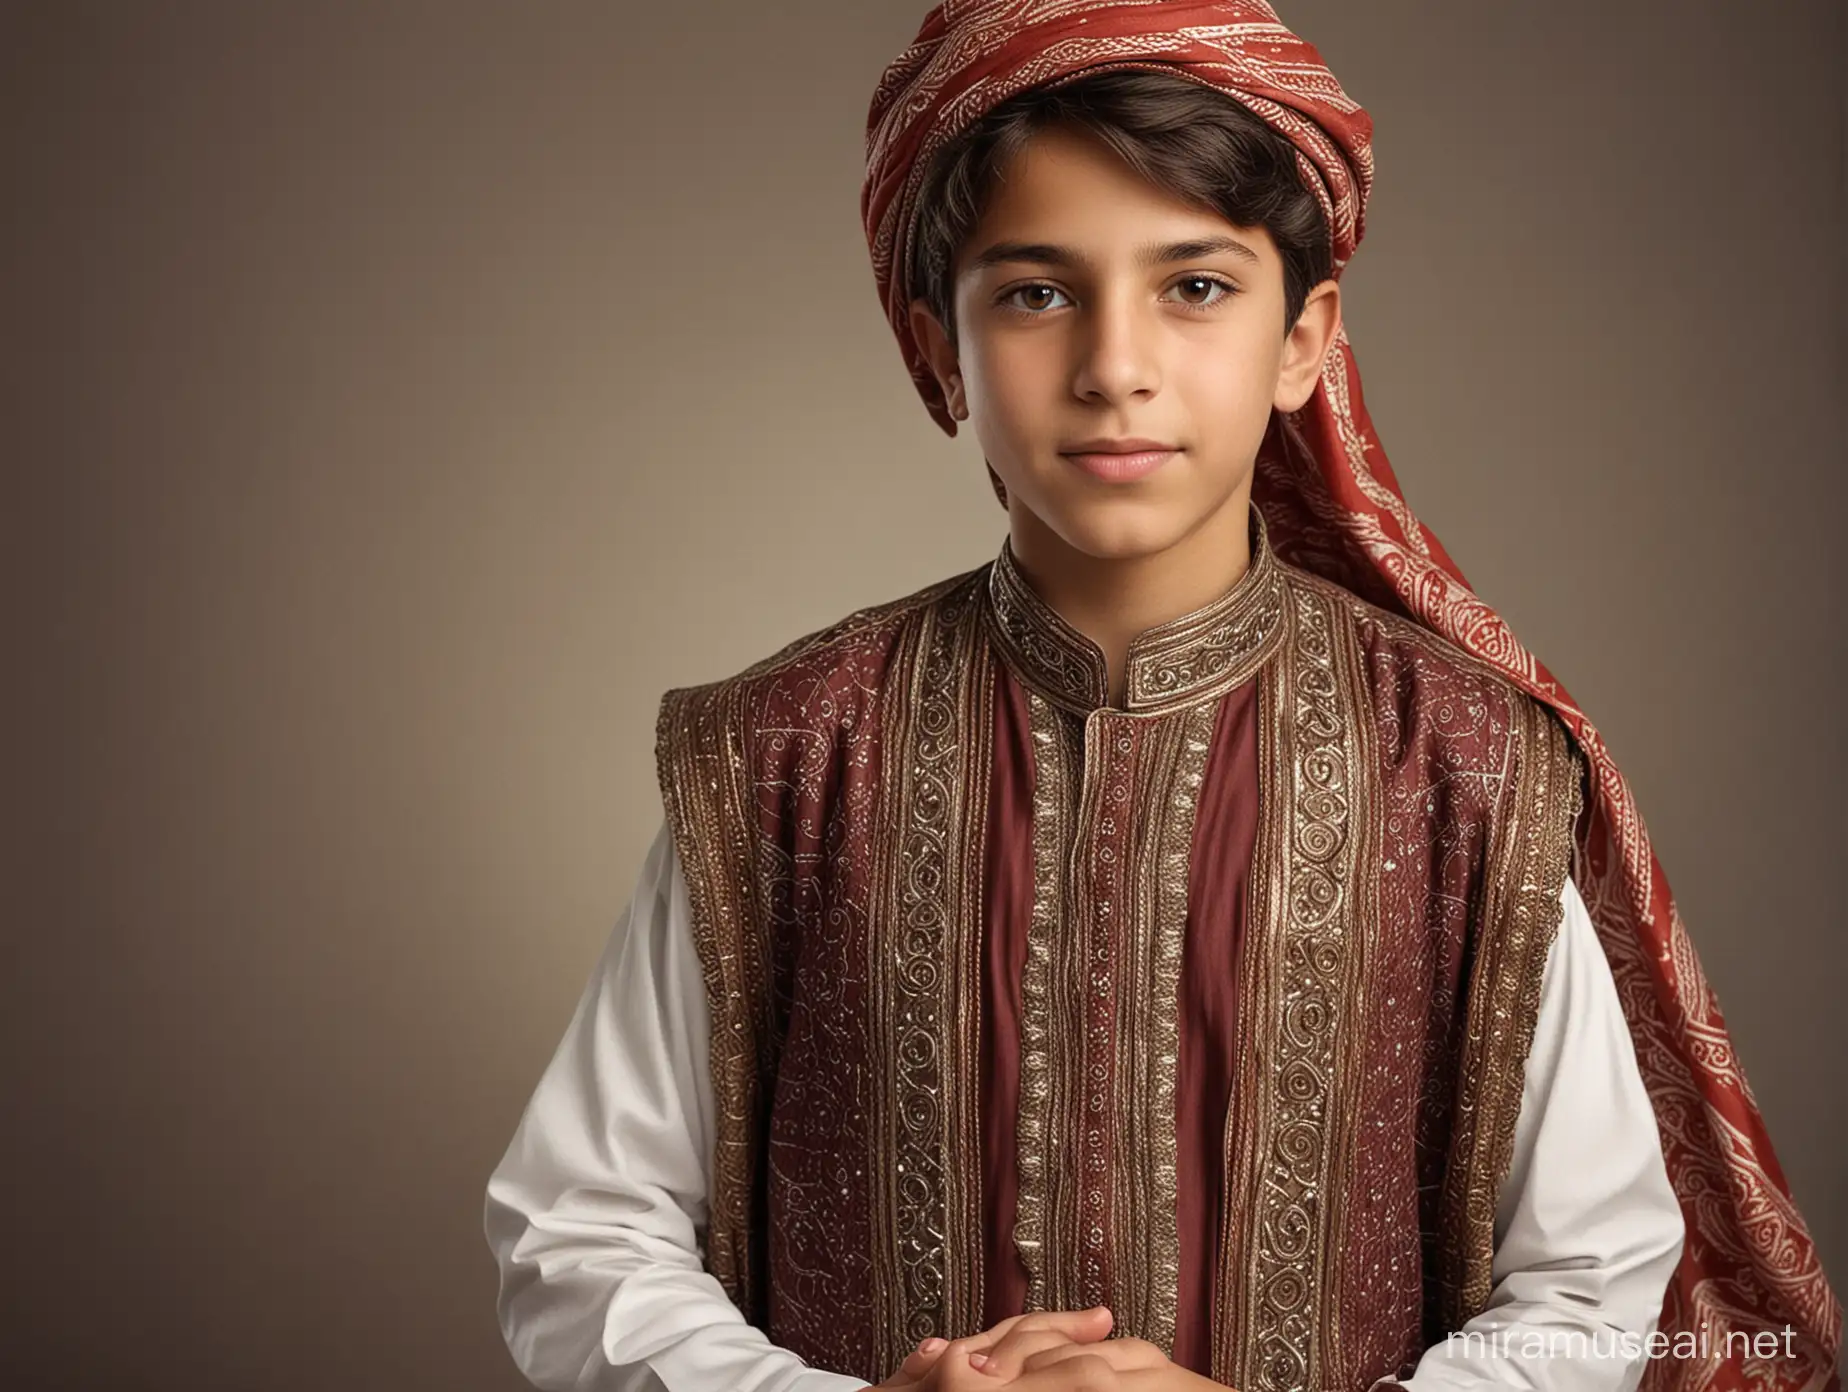 Craft a realistic photo featuring a 13-year-old boy elegantly dressed in arab clothes